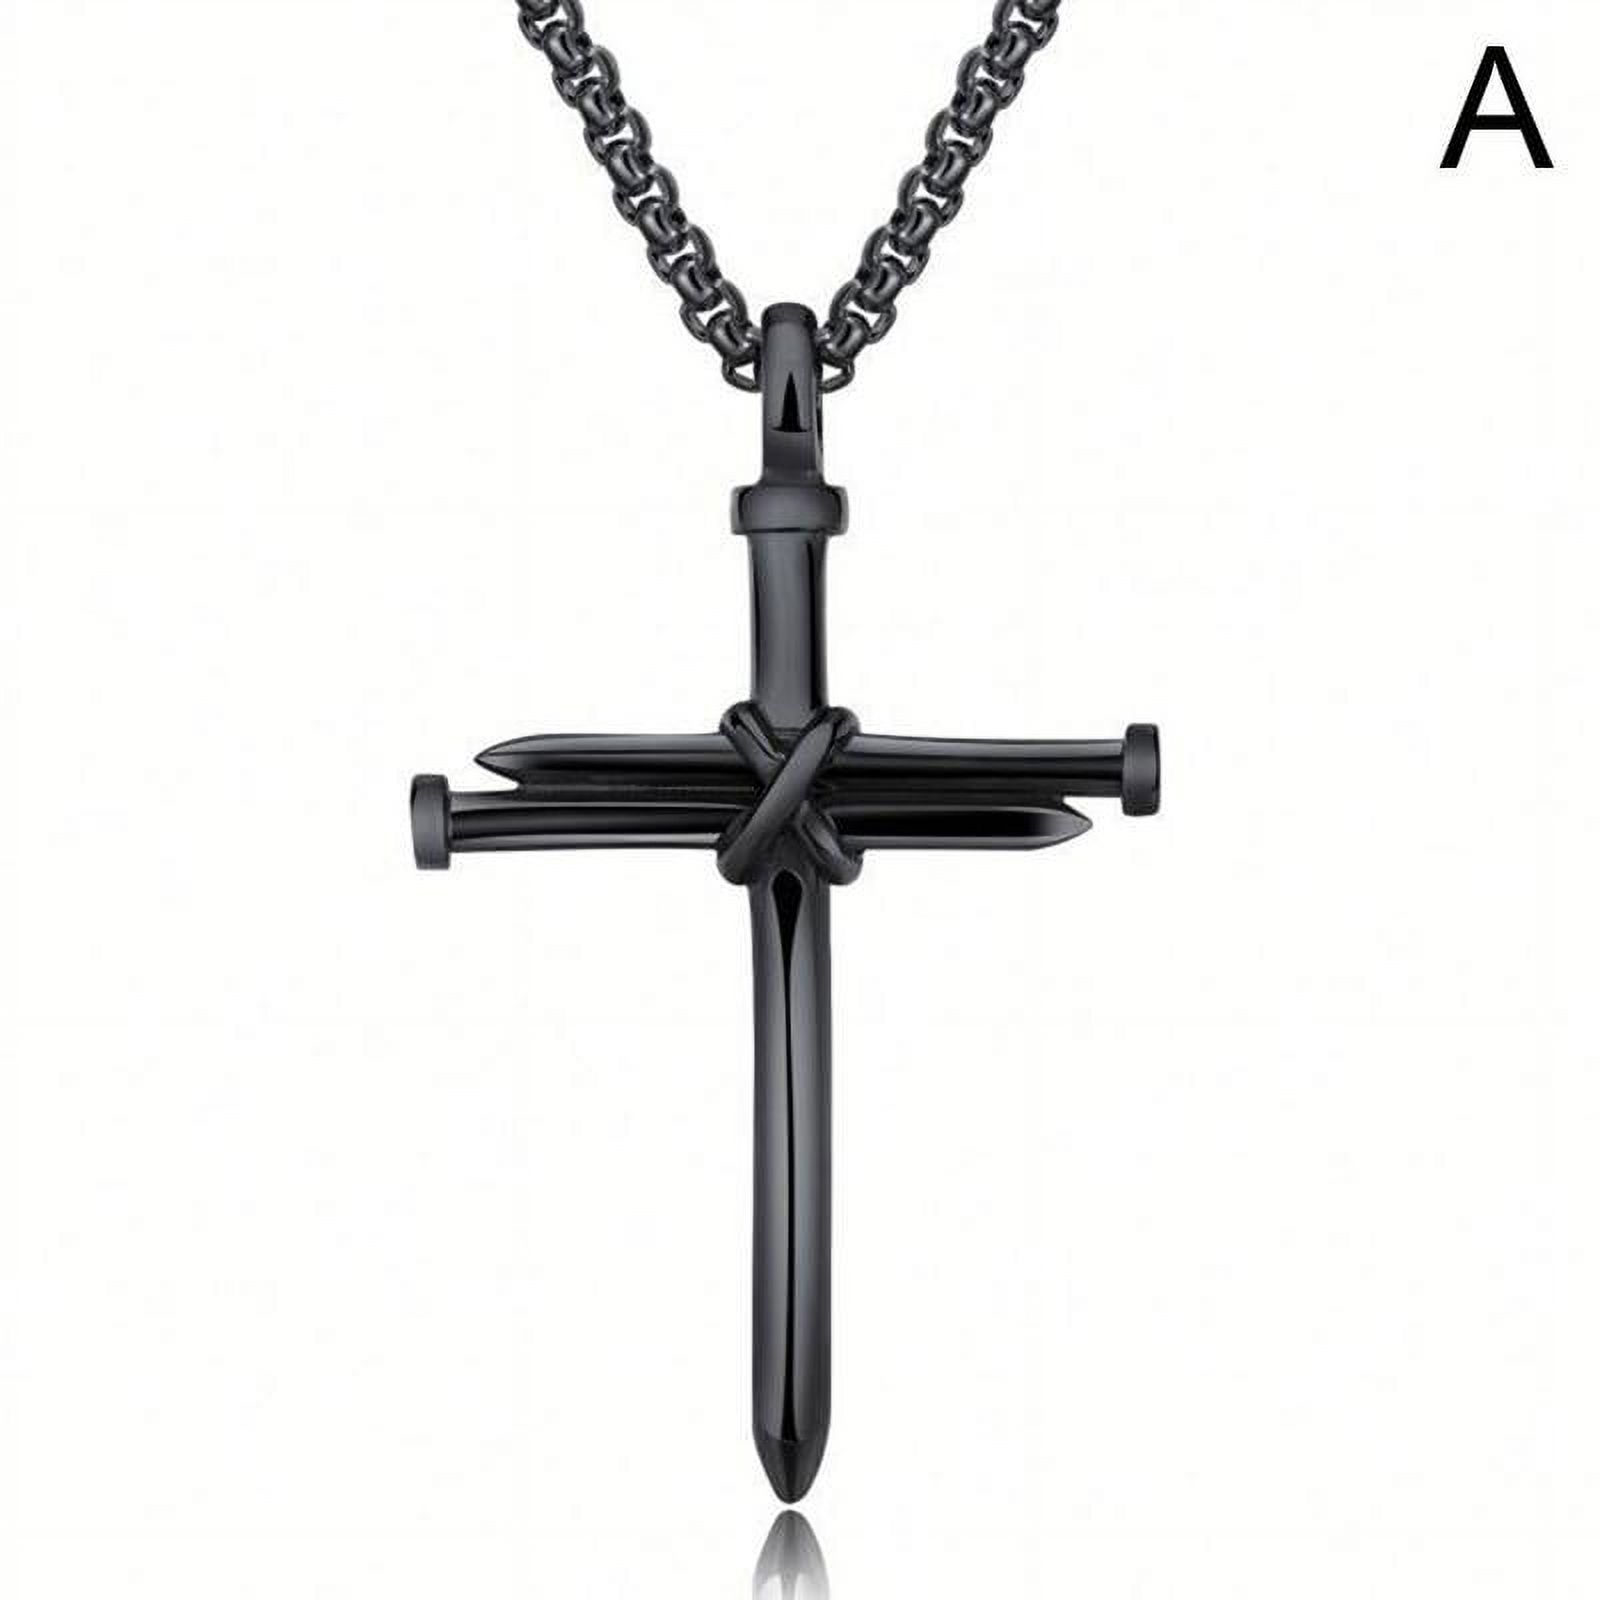 Men's Cross Necklace Cross Pendant Necklace Stainless Steel Nail and Rope Chain Necklaces Vintage Punk Choker Jewelry Gifts for Men Boys V6M5 - image 1 of 9